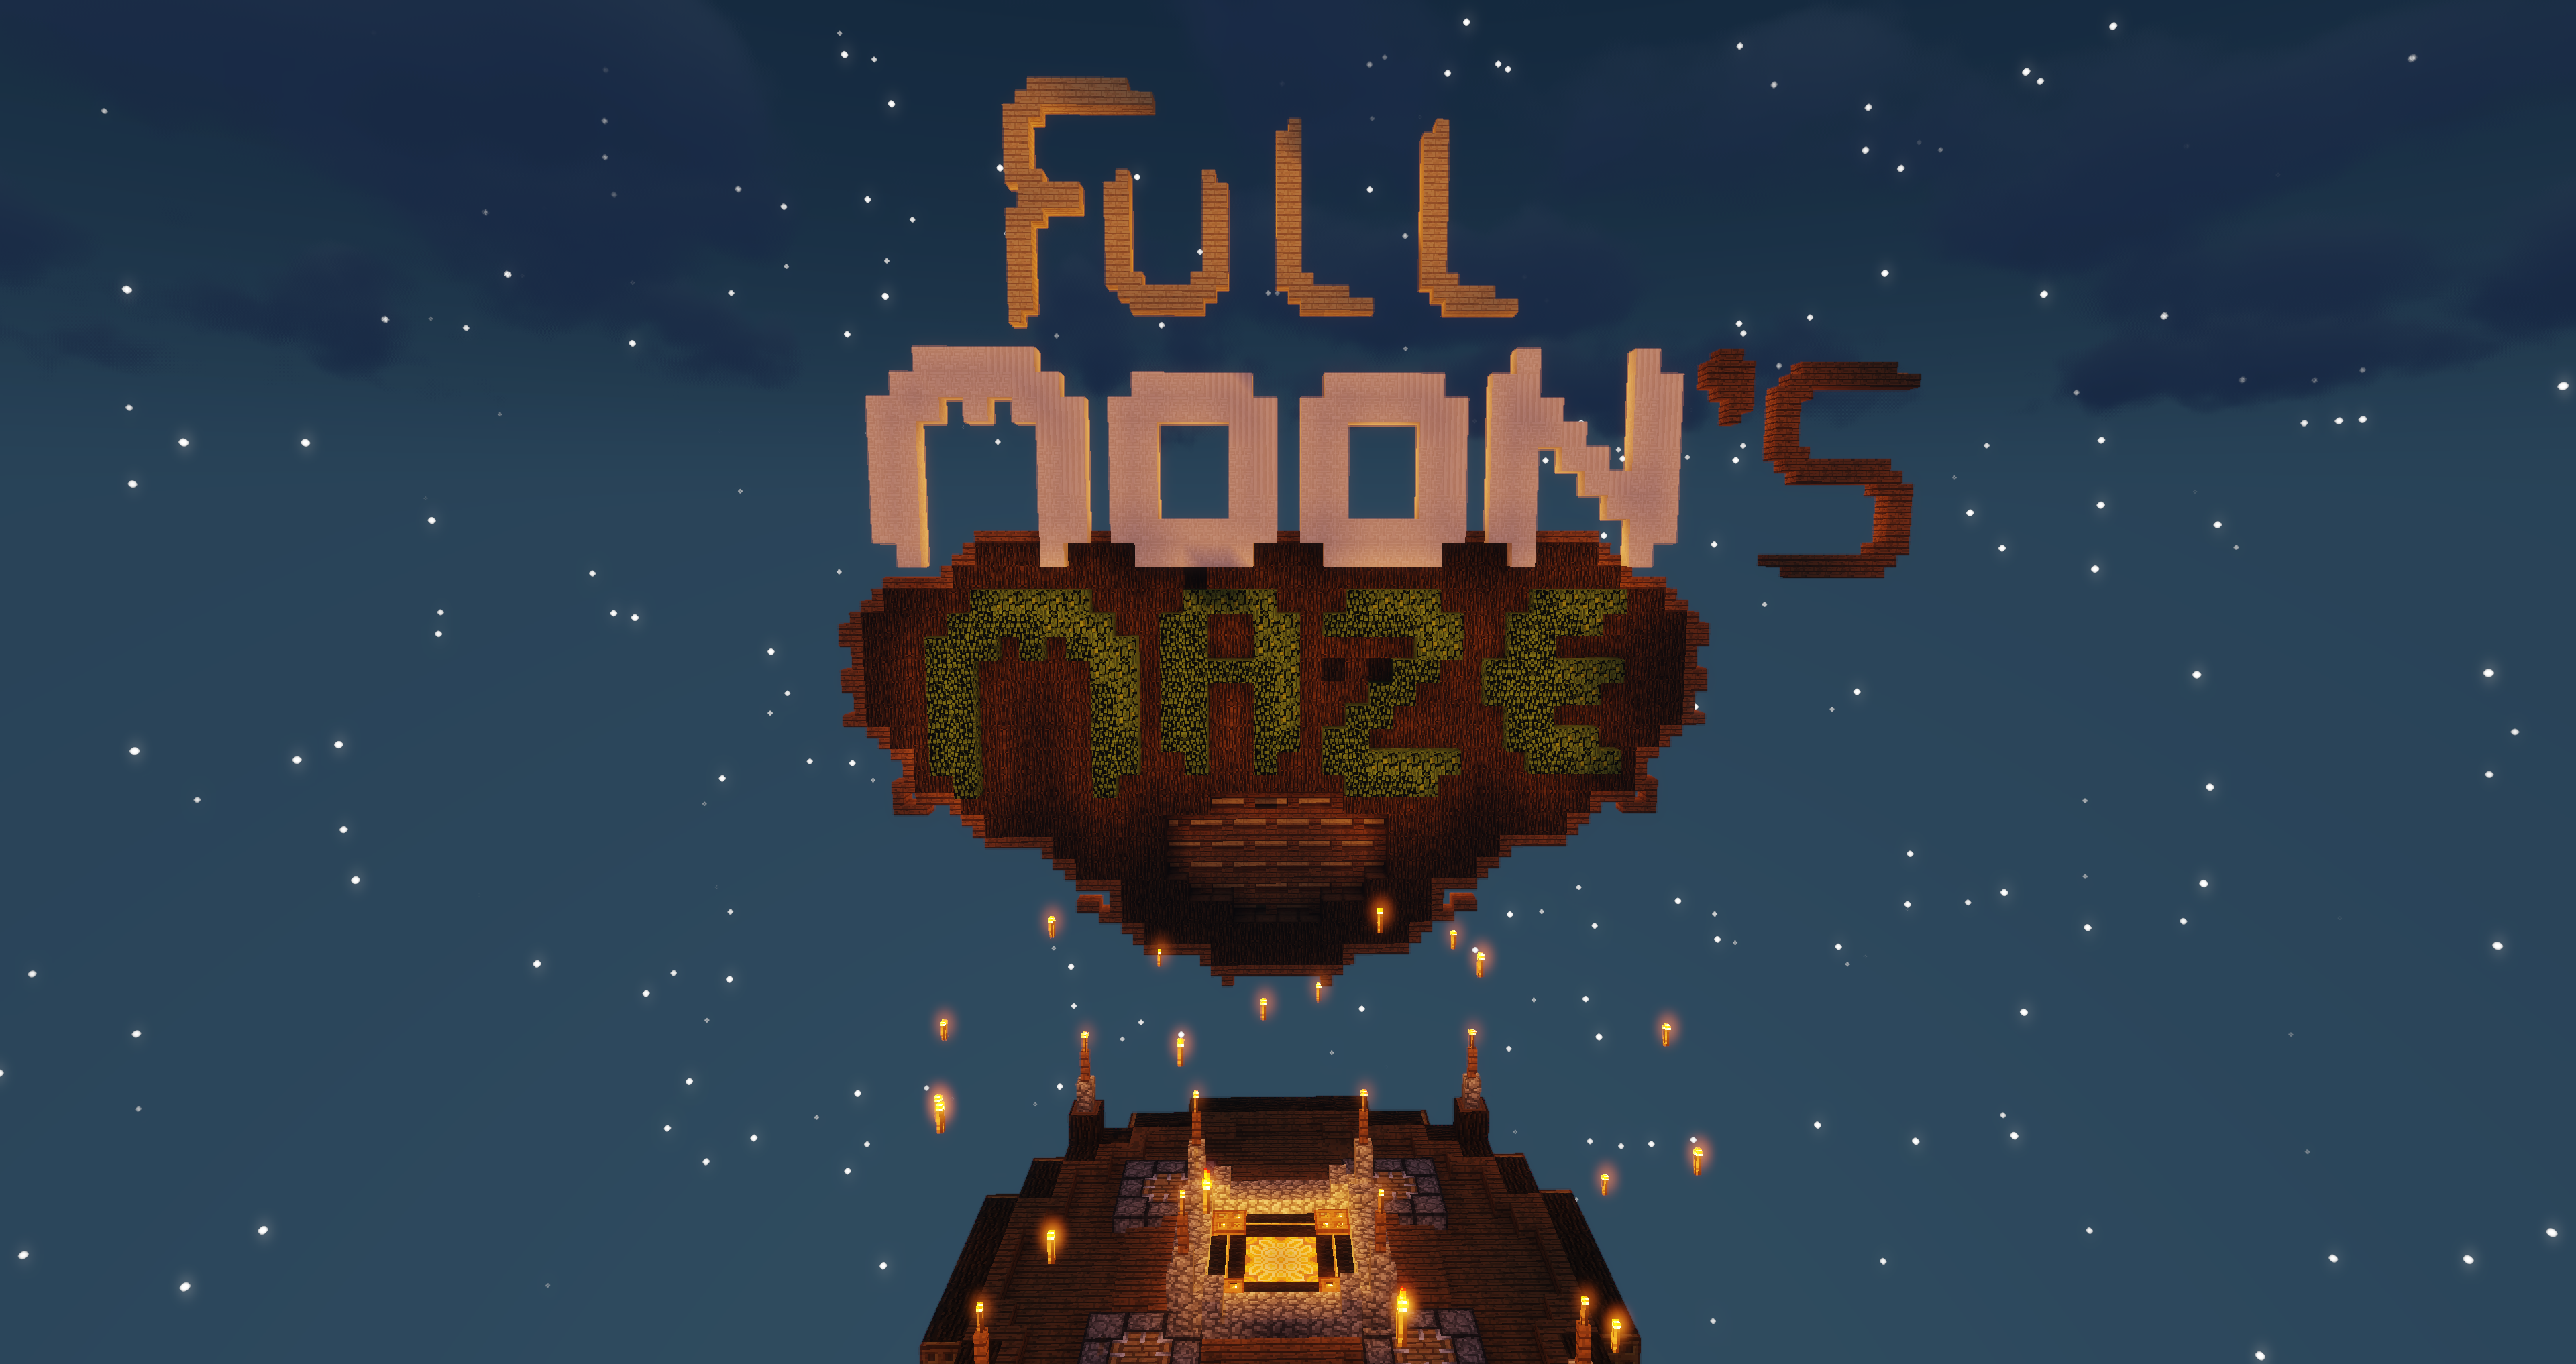 Download Full Moon Maze for Minecraft 1.12.2